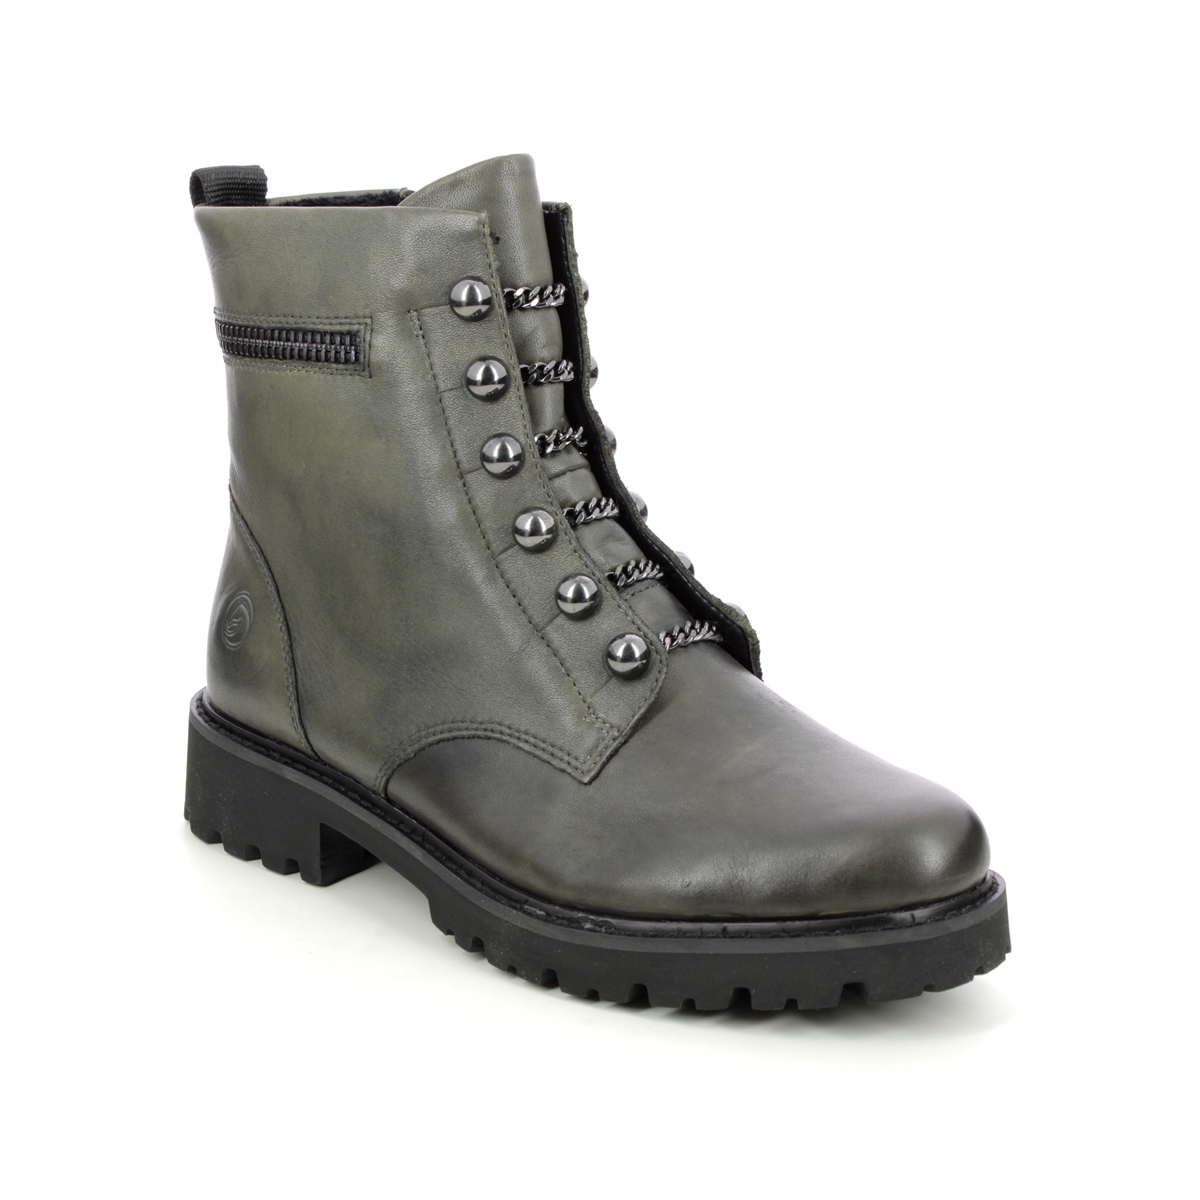 Remonte Docland Olive Leather Womens Biker Boots D8670-52 In Size 40 In Plain Olive Leather